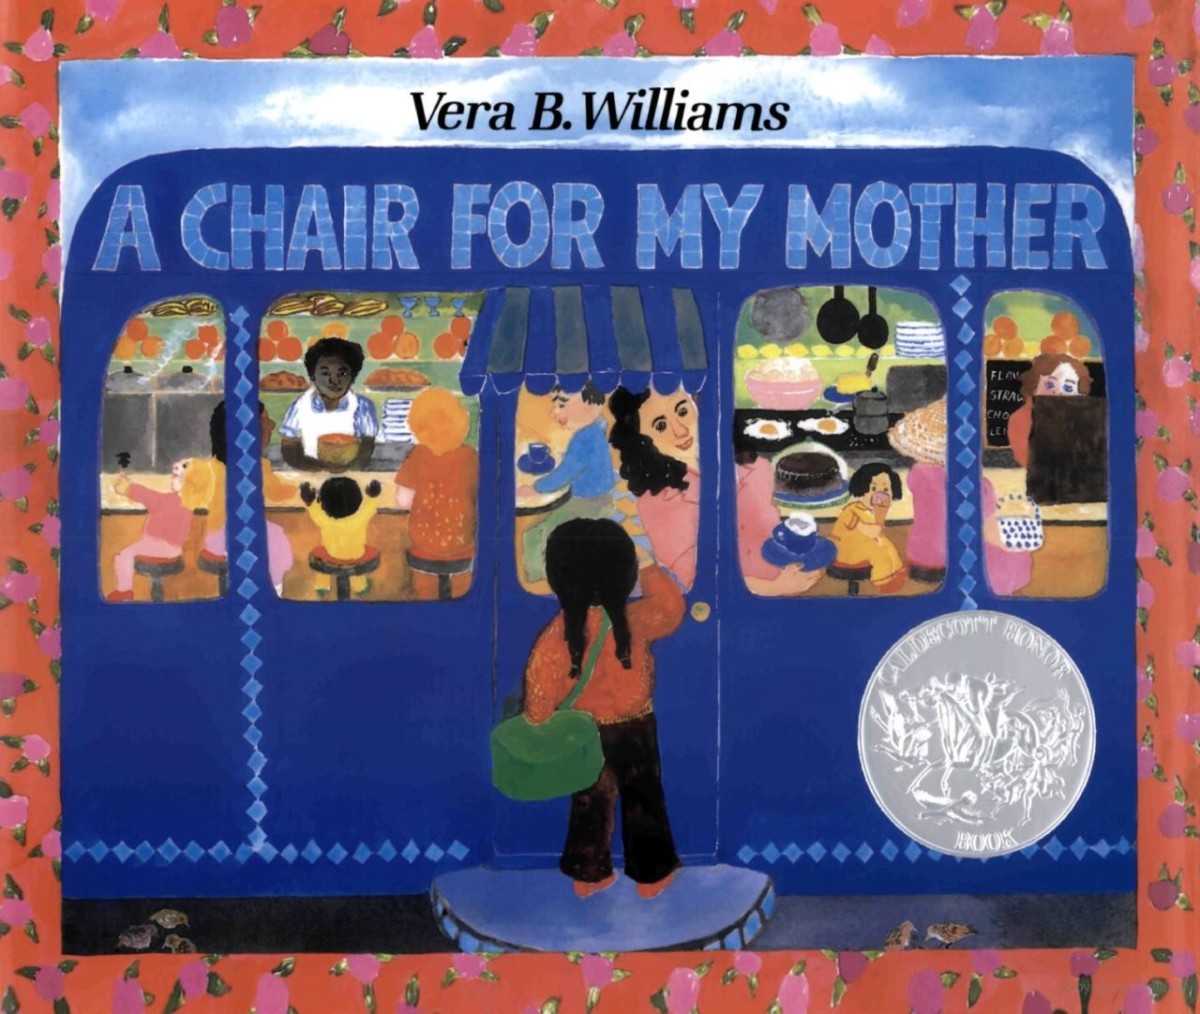 A Chair for My Mother by Vera B. Williams is a book about goal-setting, saving money, and love for family.